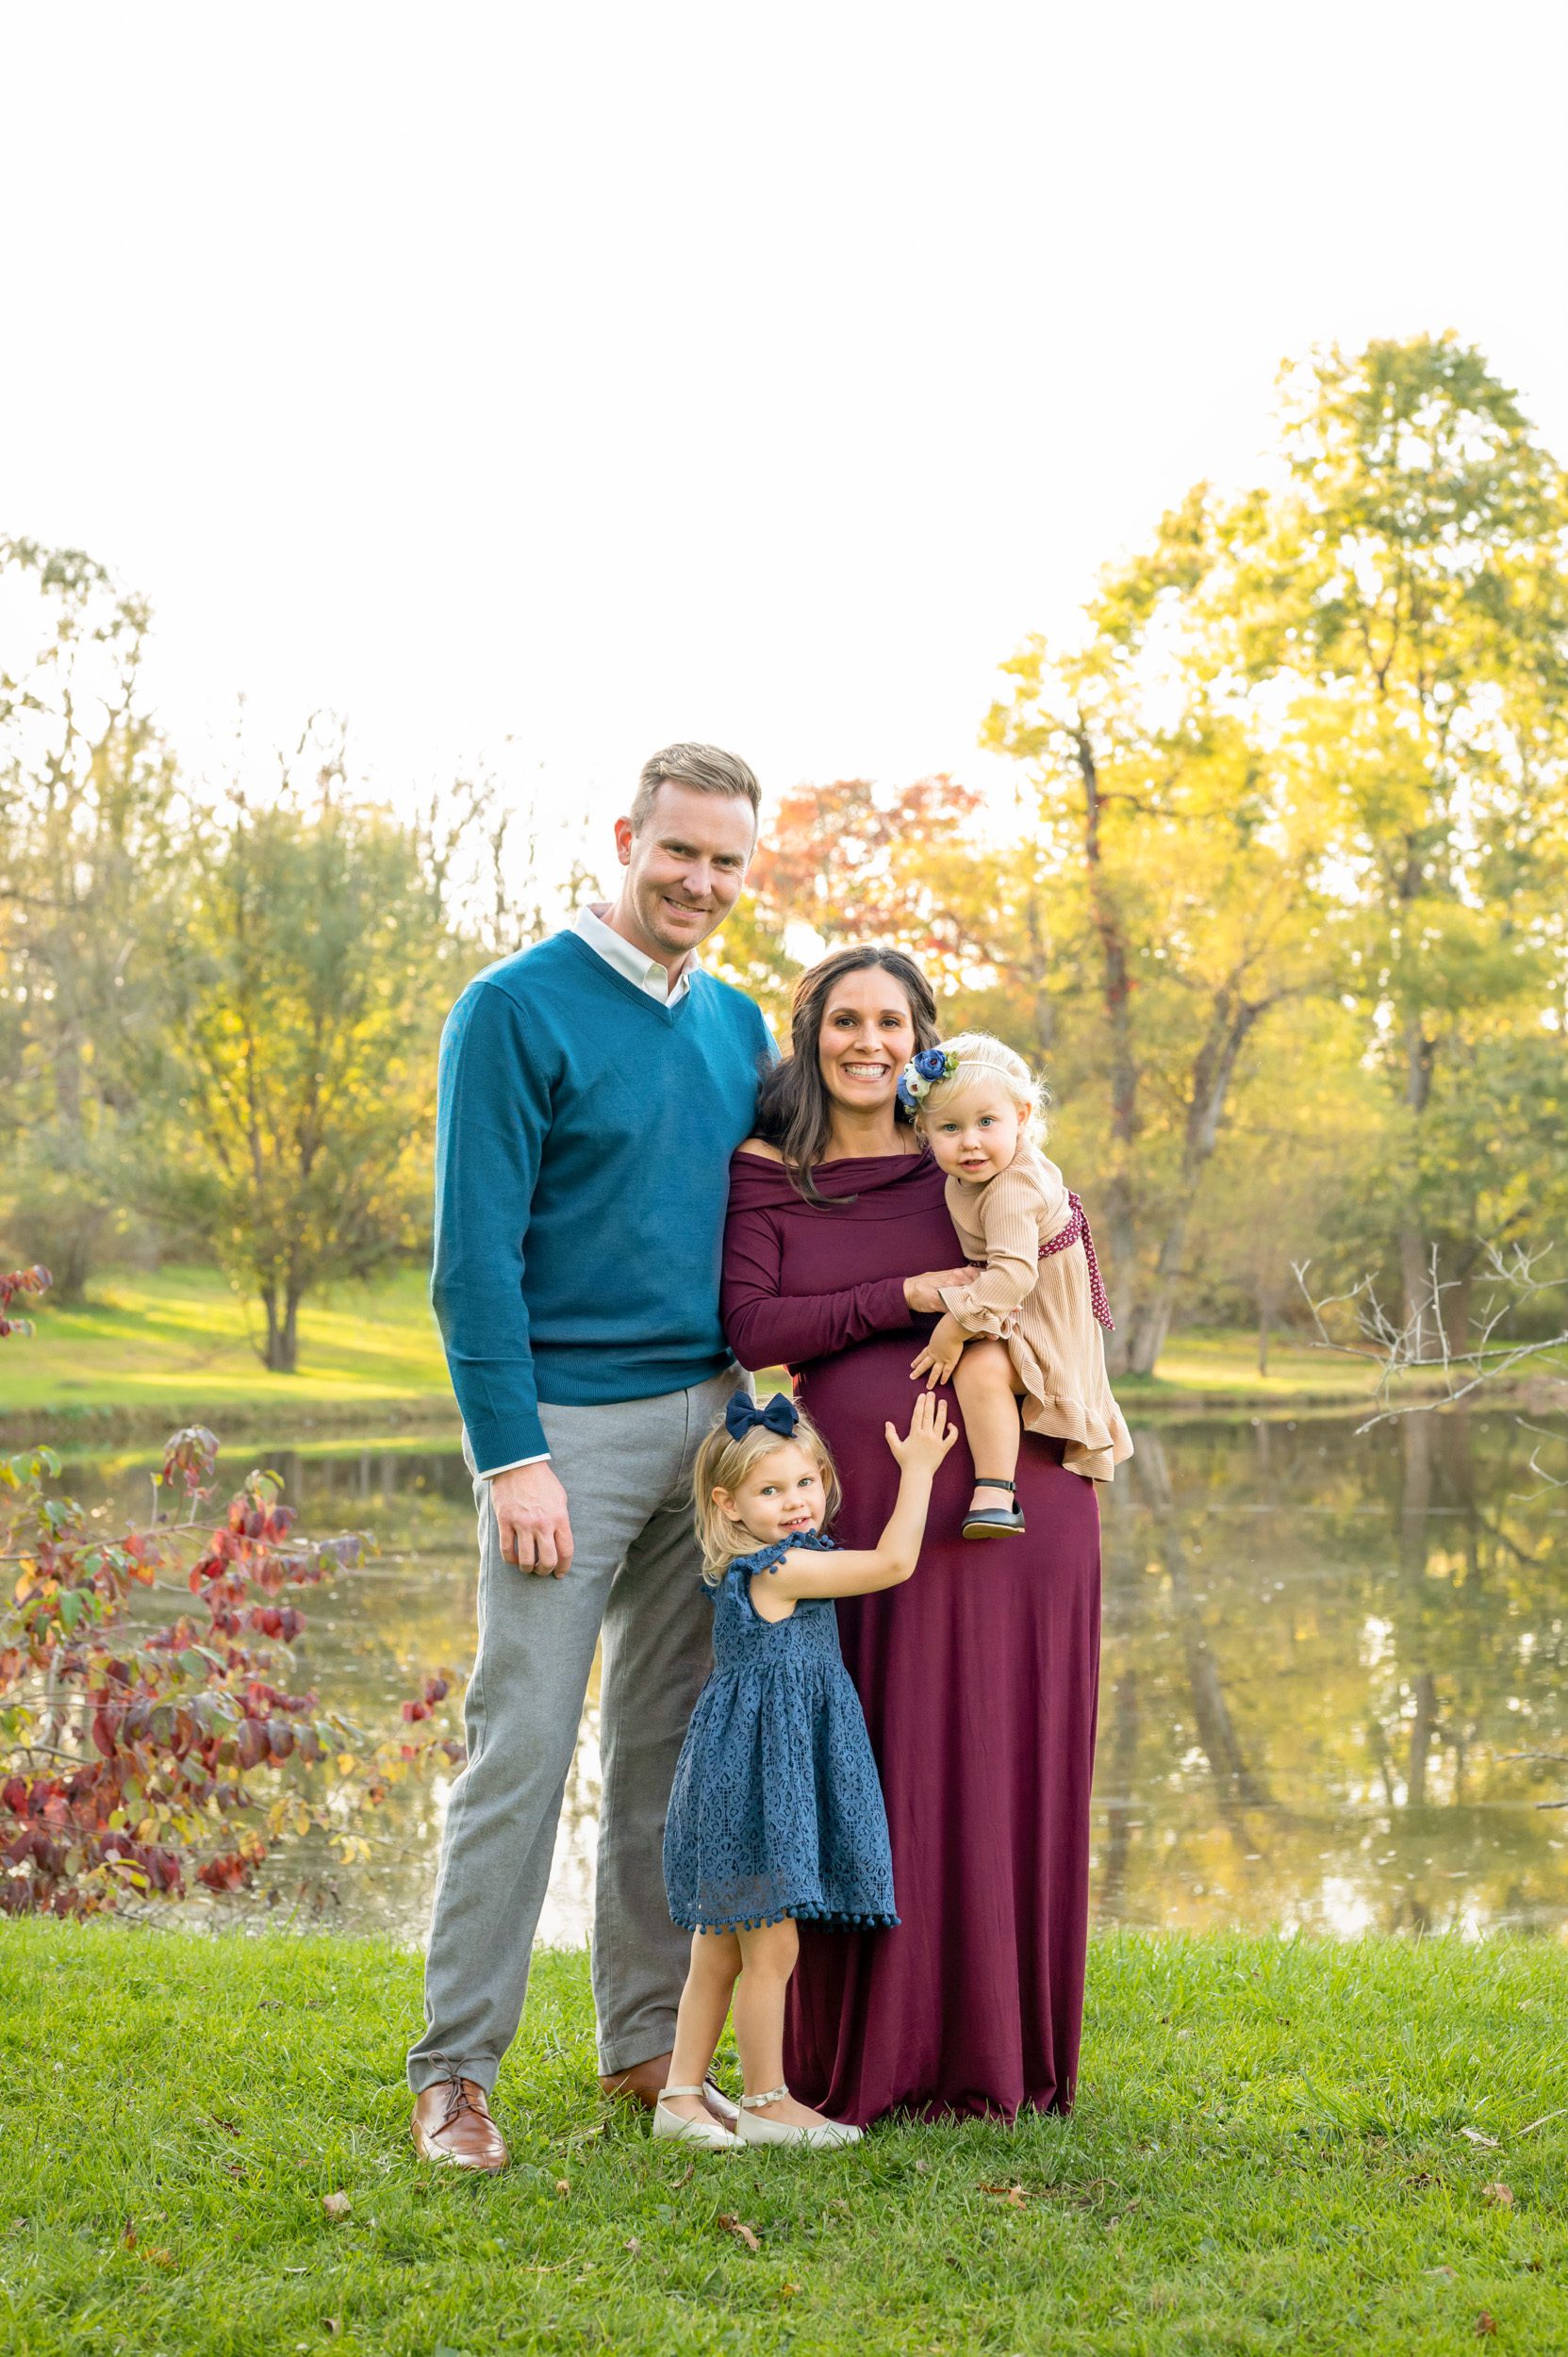 expecting parents and their two young daughters standing in front of a pond and smiling at the camera while they all touch mom's belly during a maternity photo session